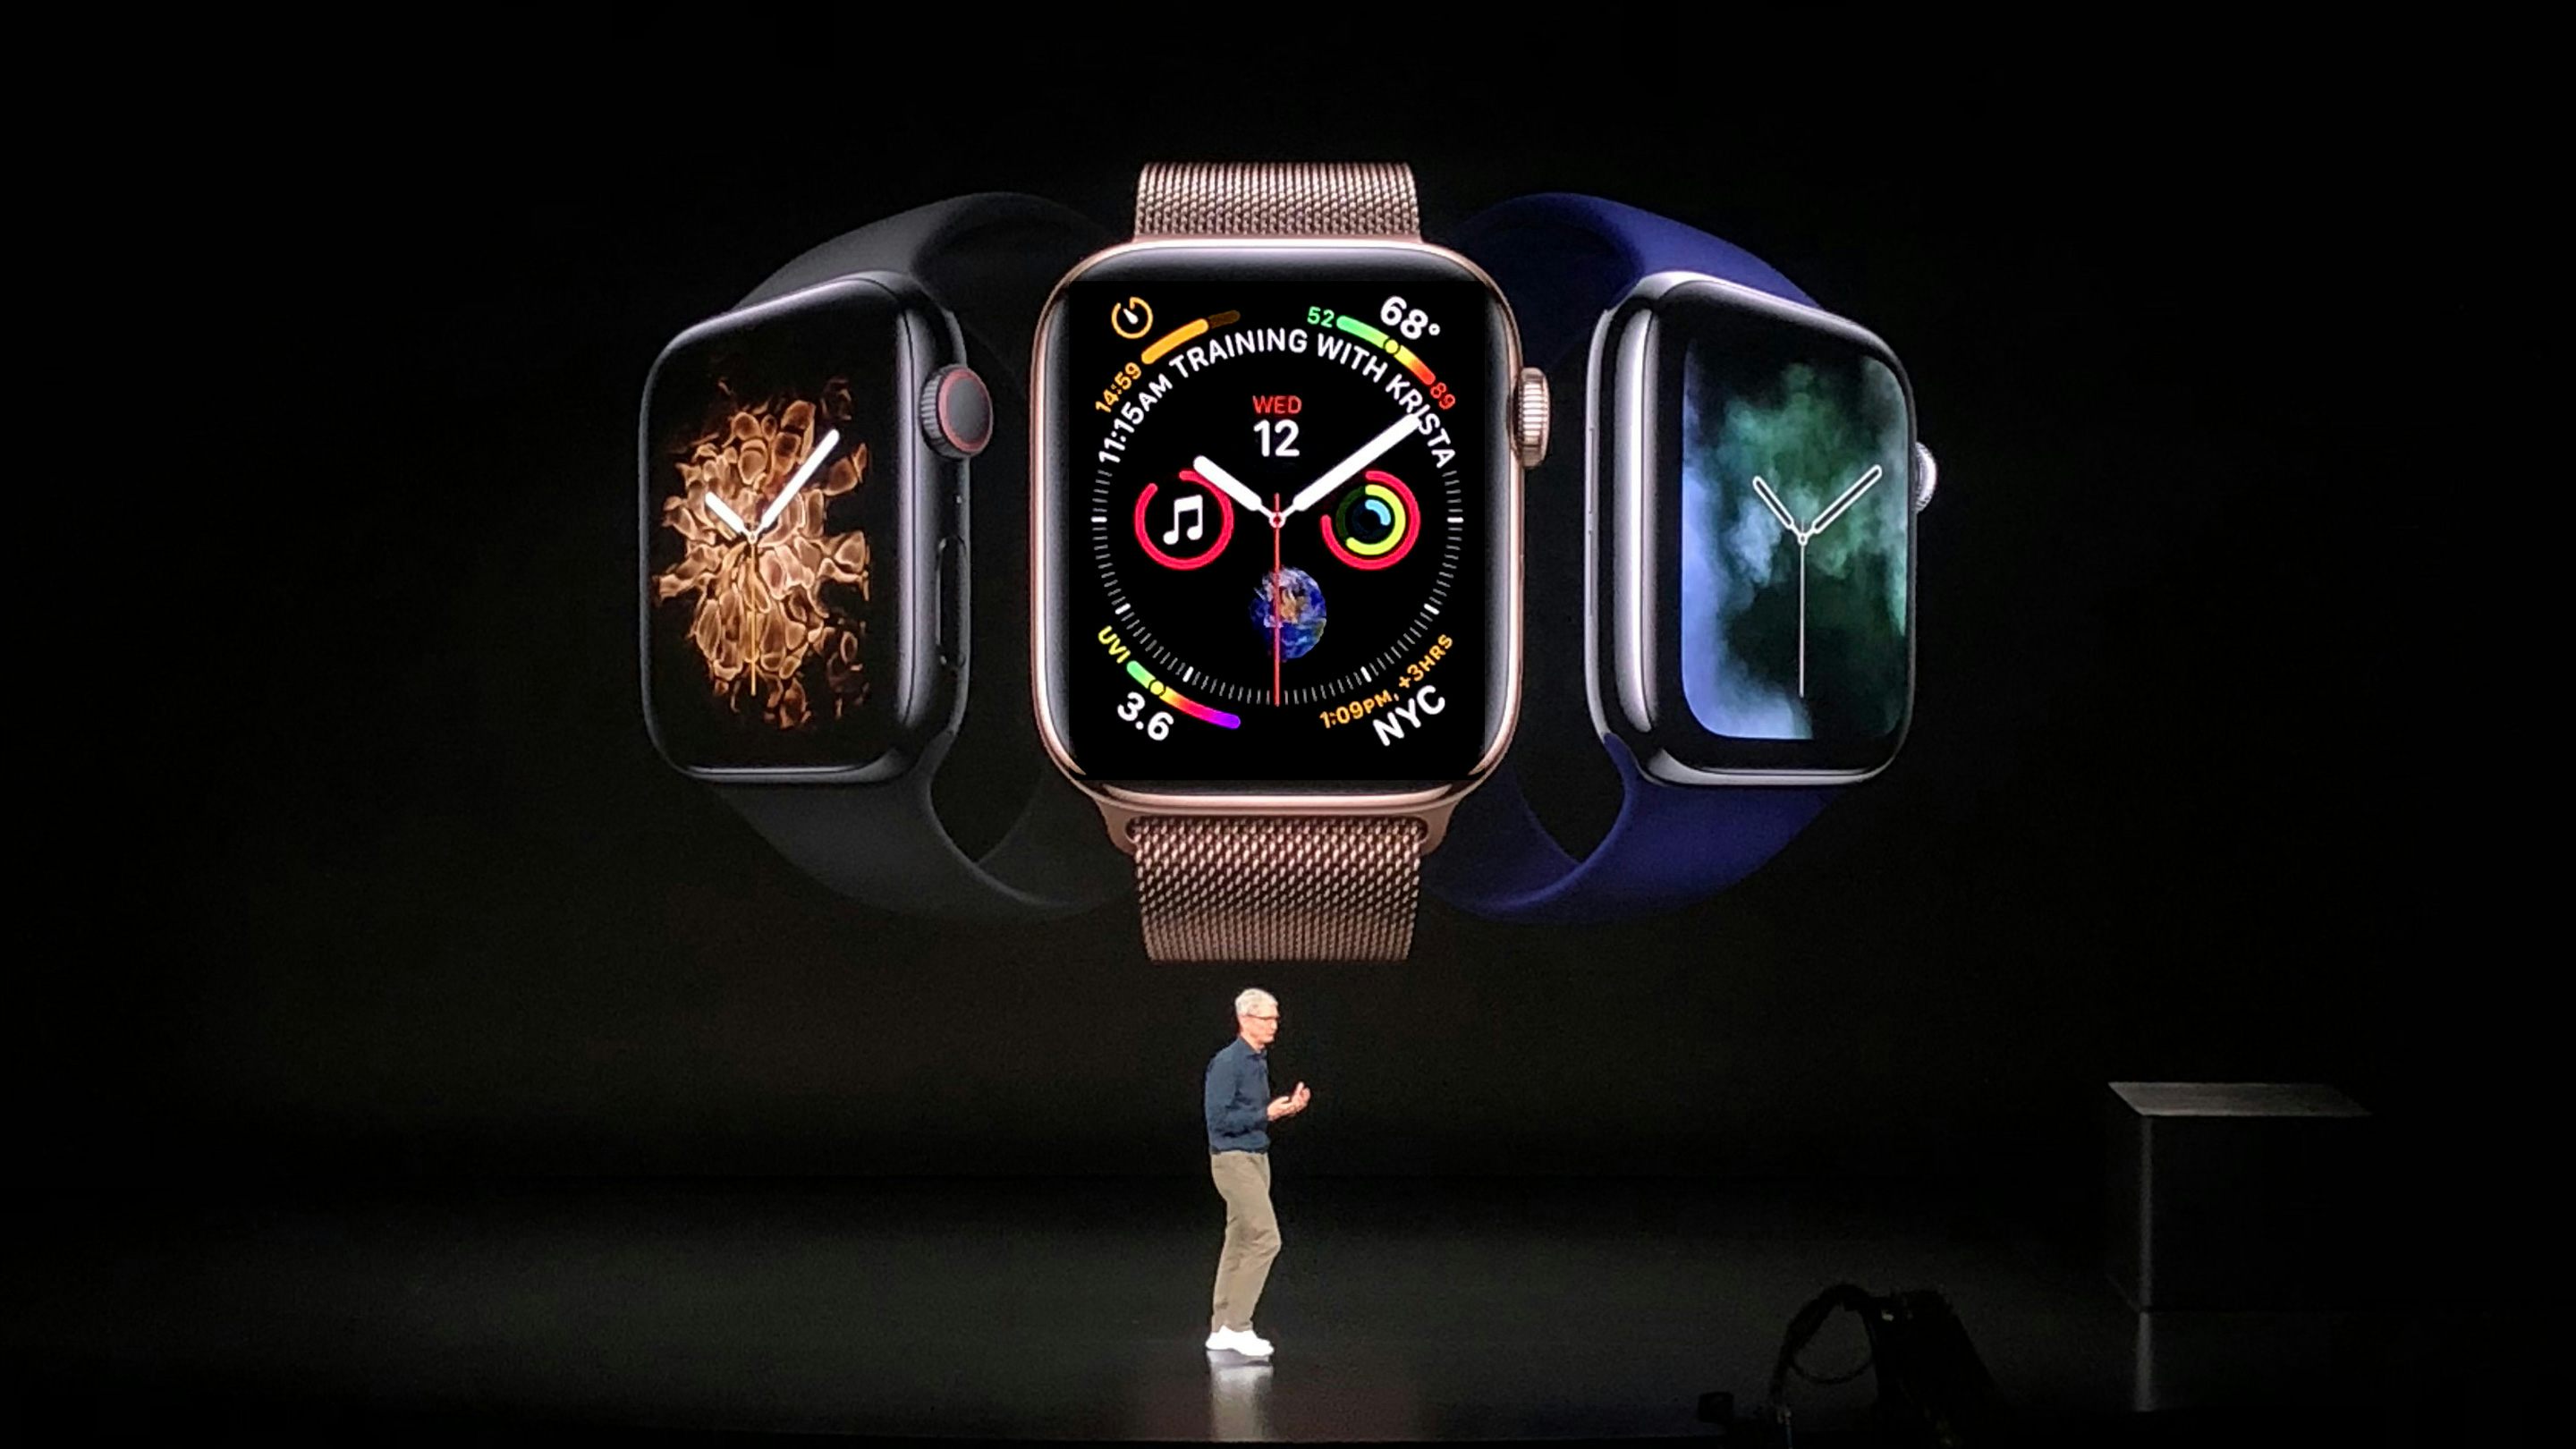 Apple Watch Series 4: Price, Release Date, and Specs